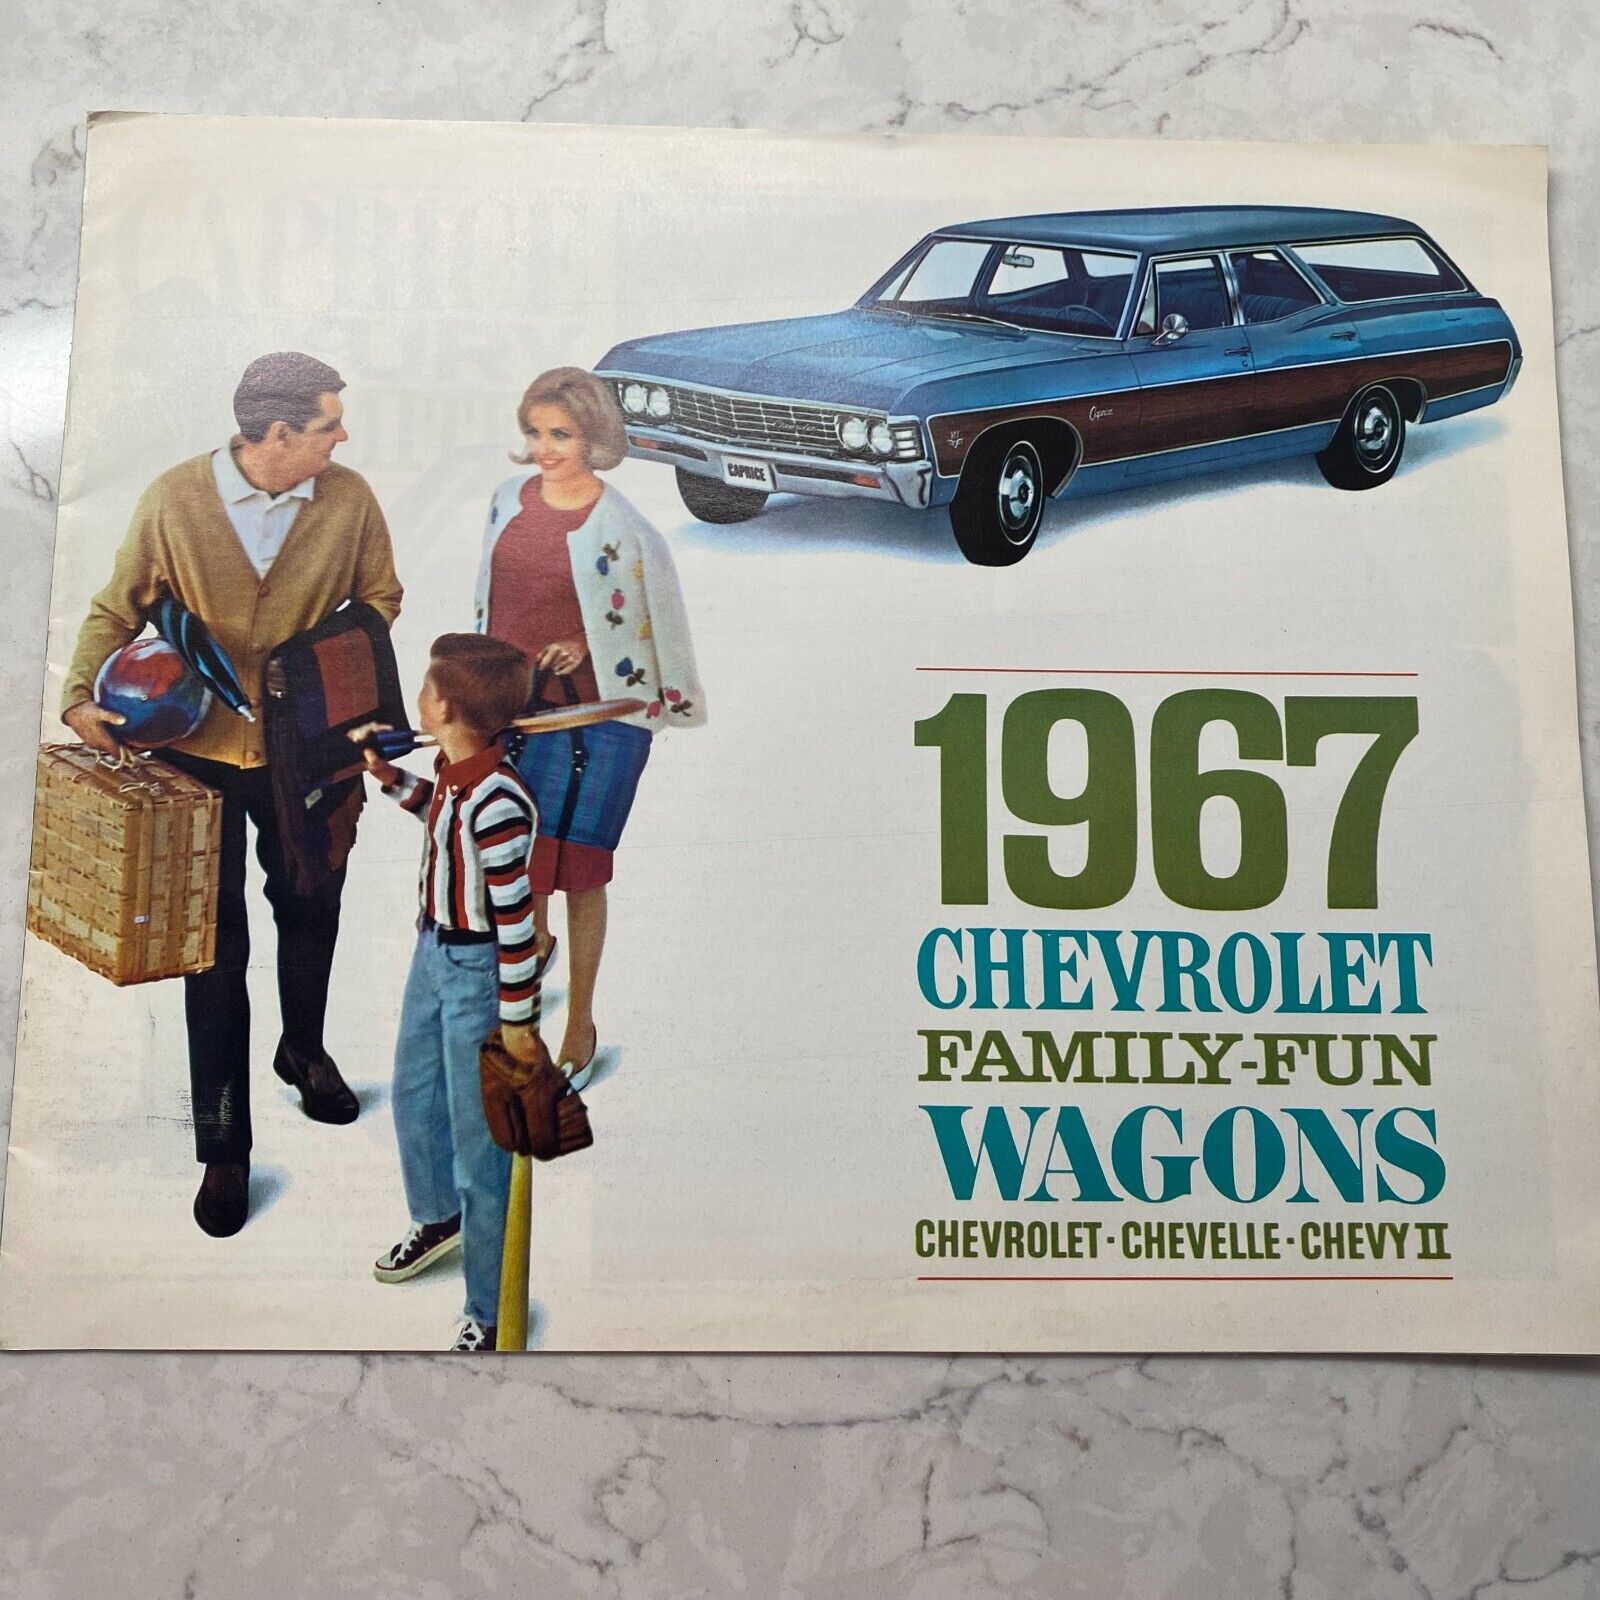 1967 Chevrolet Chevelle and Chevy II Family-Fun Wagons Dealer Sales Brochure